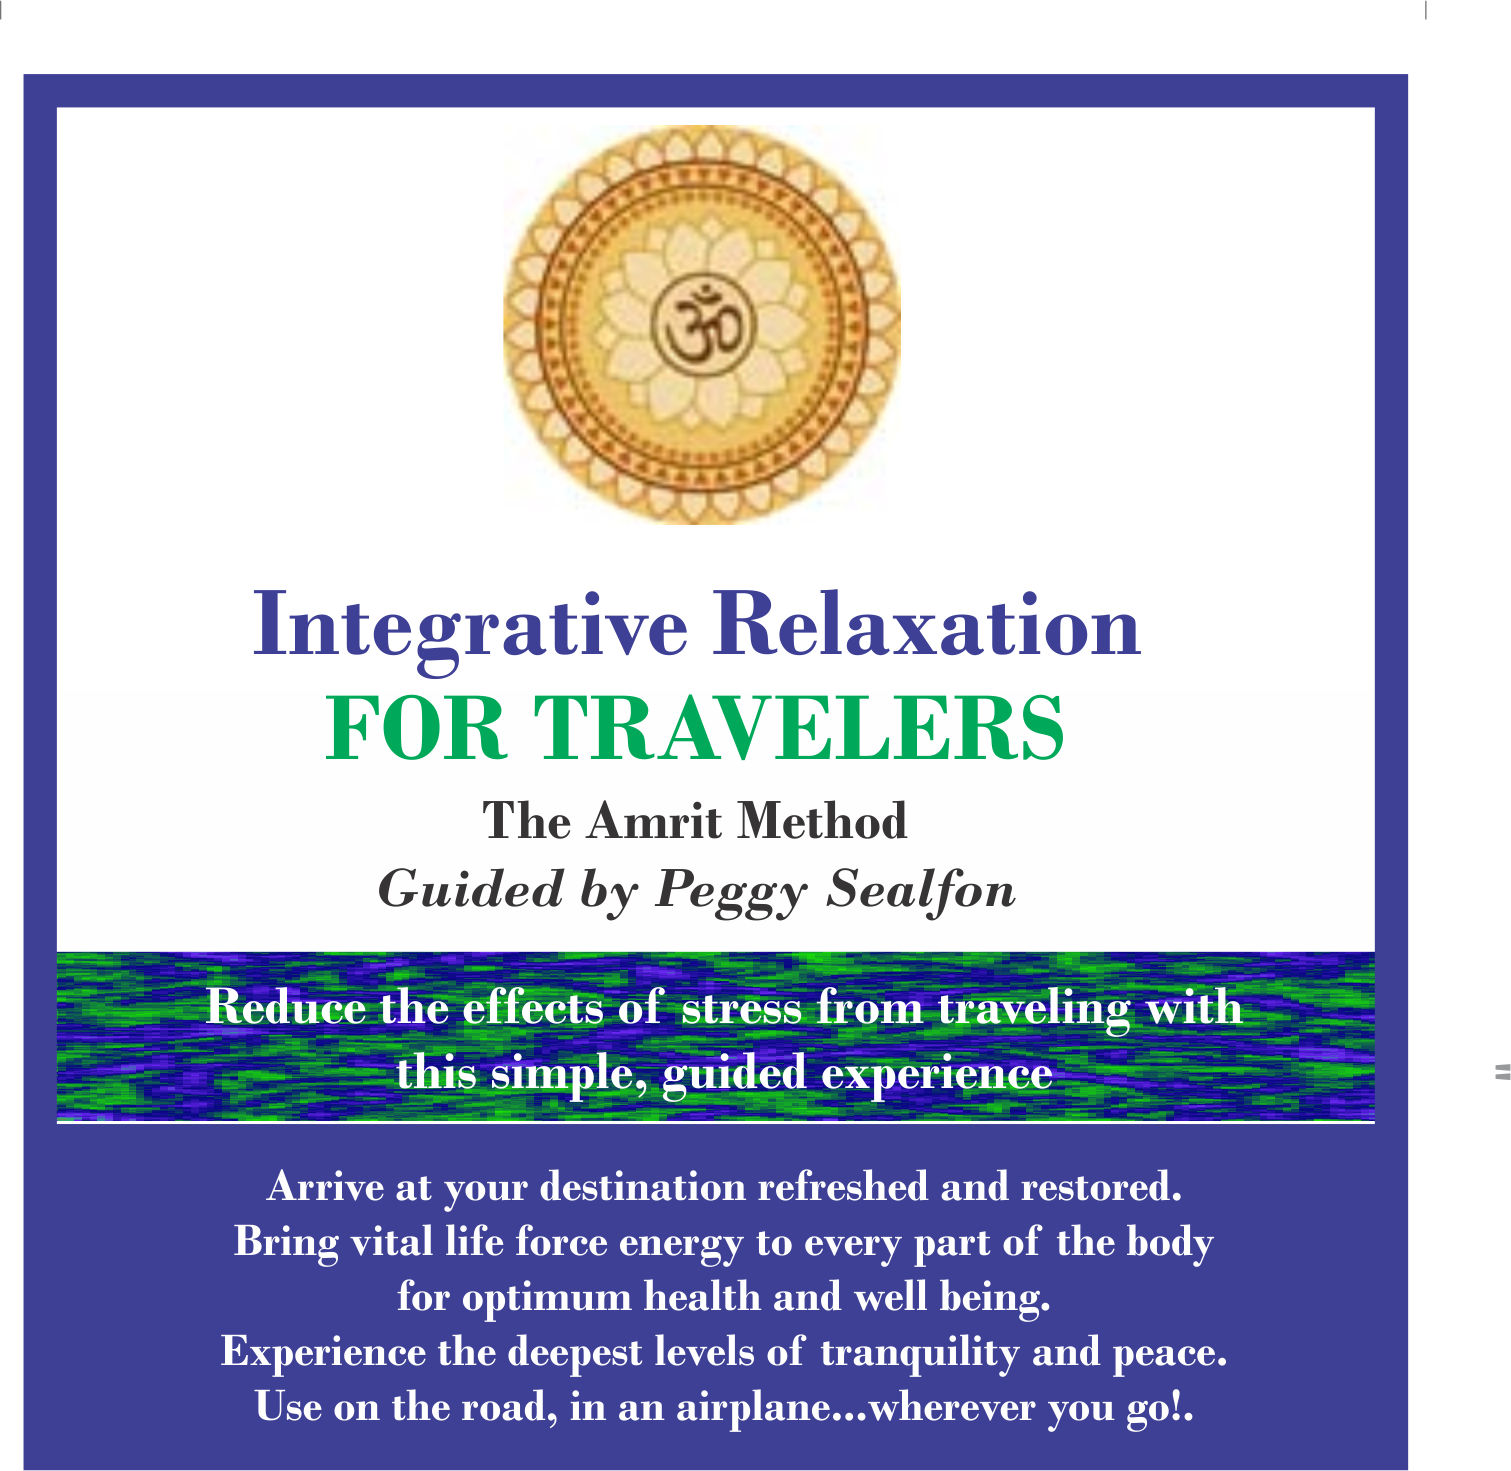 Integrative Relaxation for Travelers (downloadable)